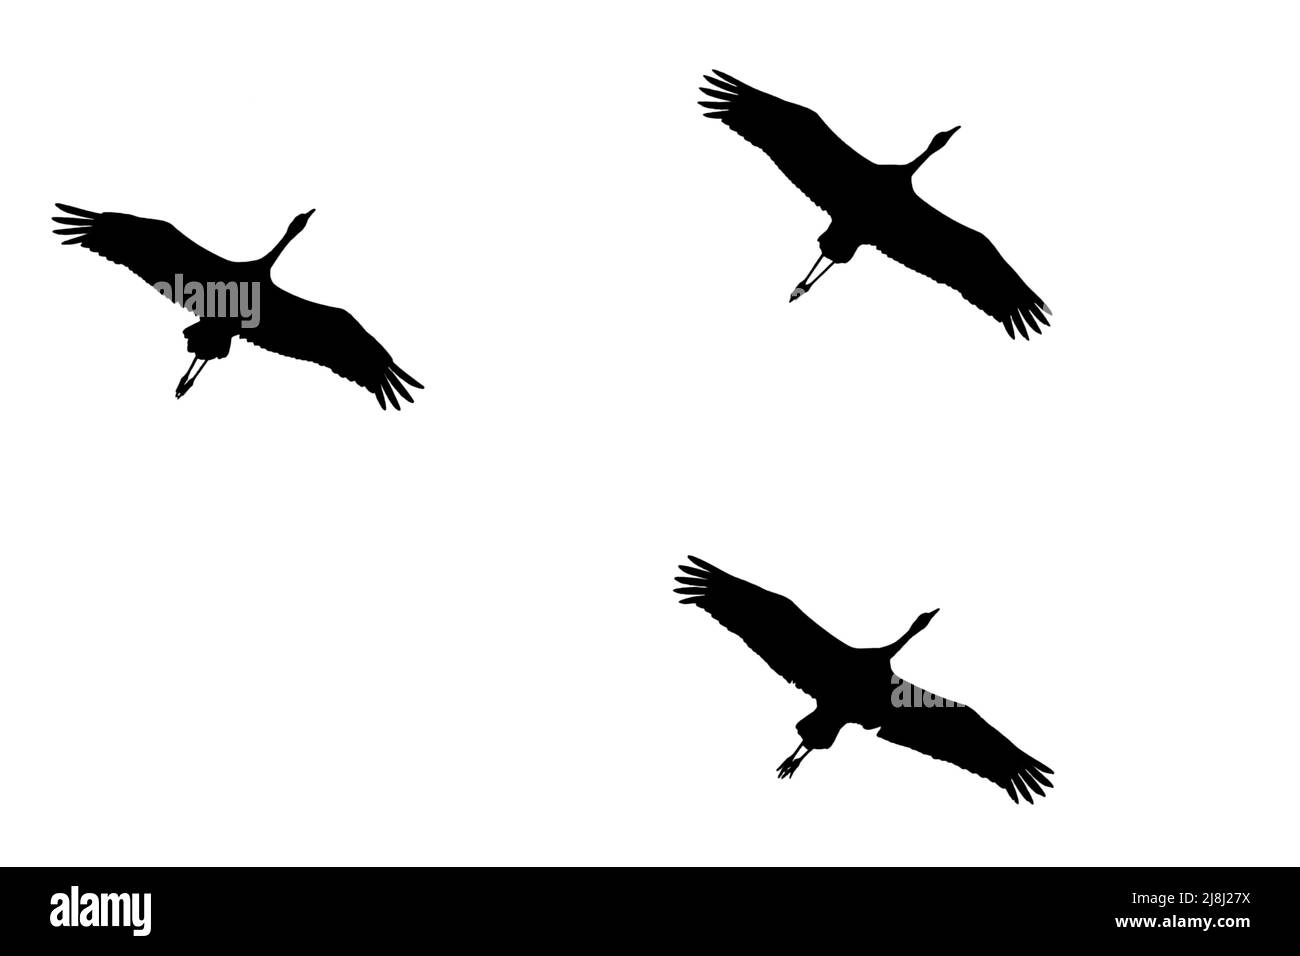 Silhouette of common cranes / Eurasian crane (Grus grus) flock in flight outlined against white background to show wings, head and tail shapes Stock Photo